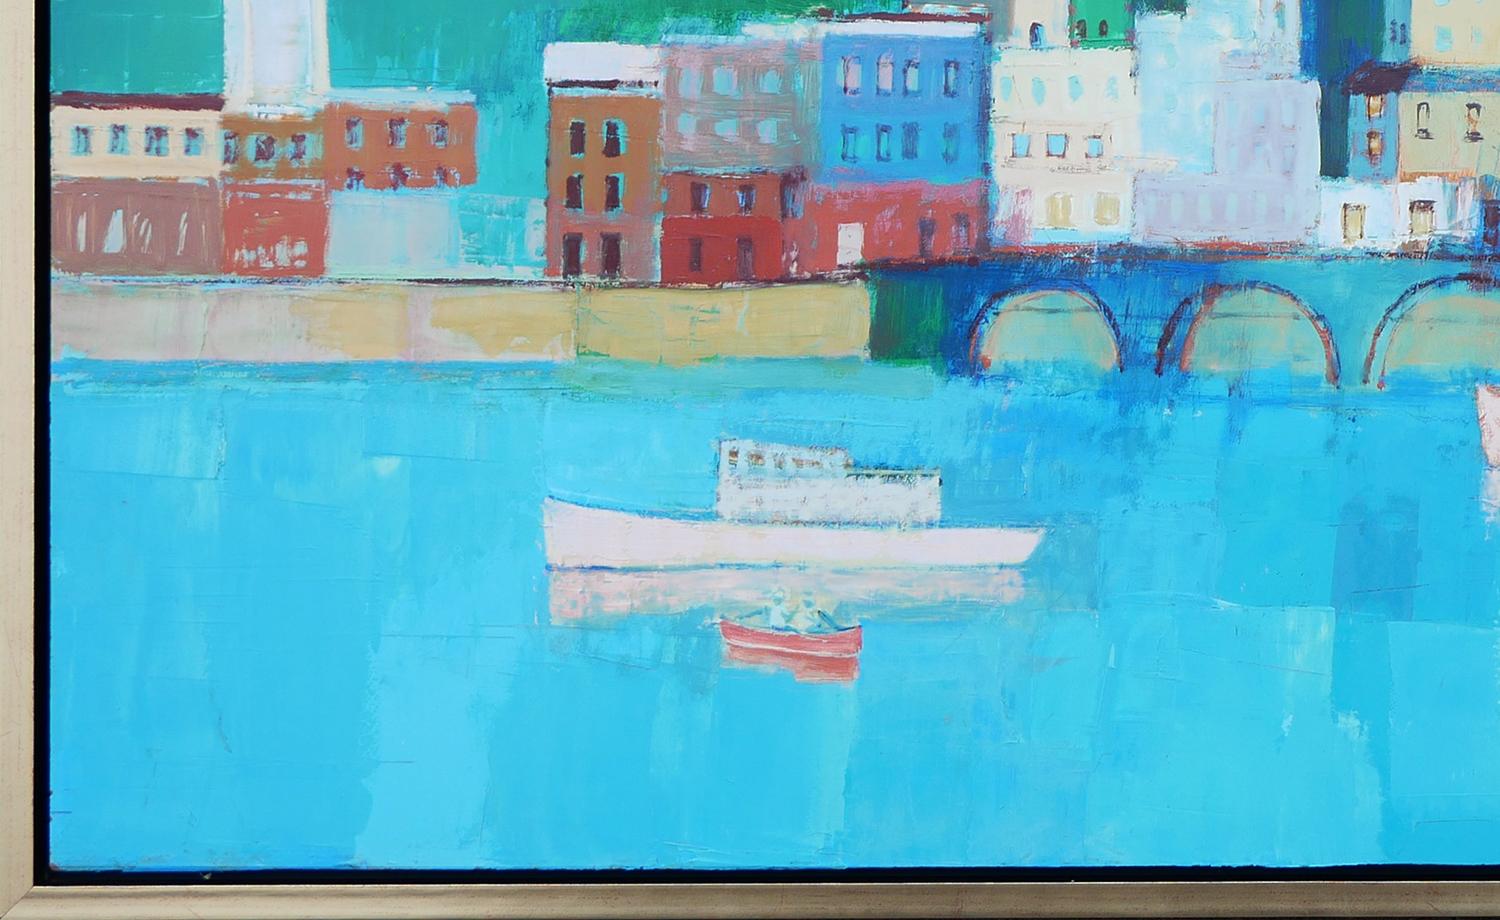 Blue-toned geometric abstract landscape by Herb Mears. This painting depicts a town along a port with a prominent architectural bridge. Unsigned. Framed in a light gold floating frame.

Dimensions Without Frame: H 24 in. x W 48 in.

Artist